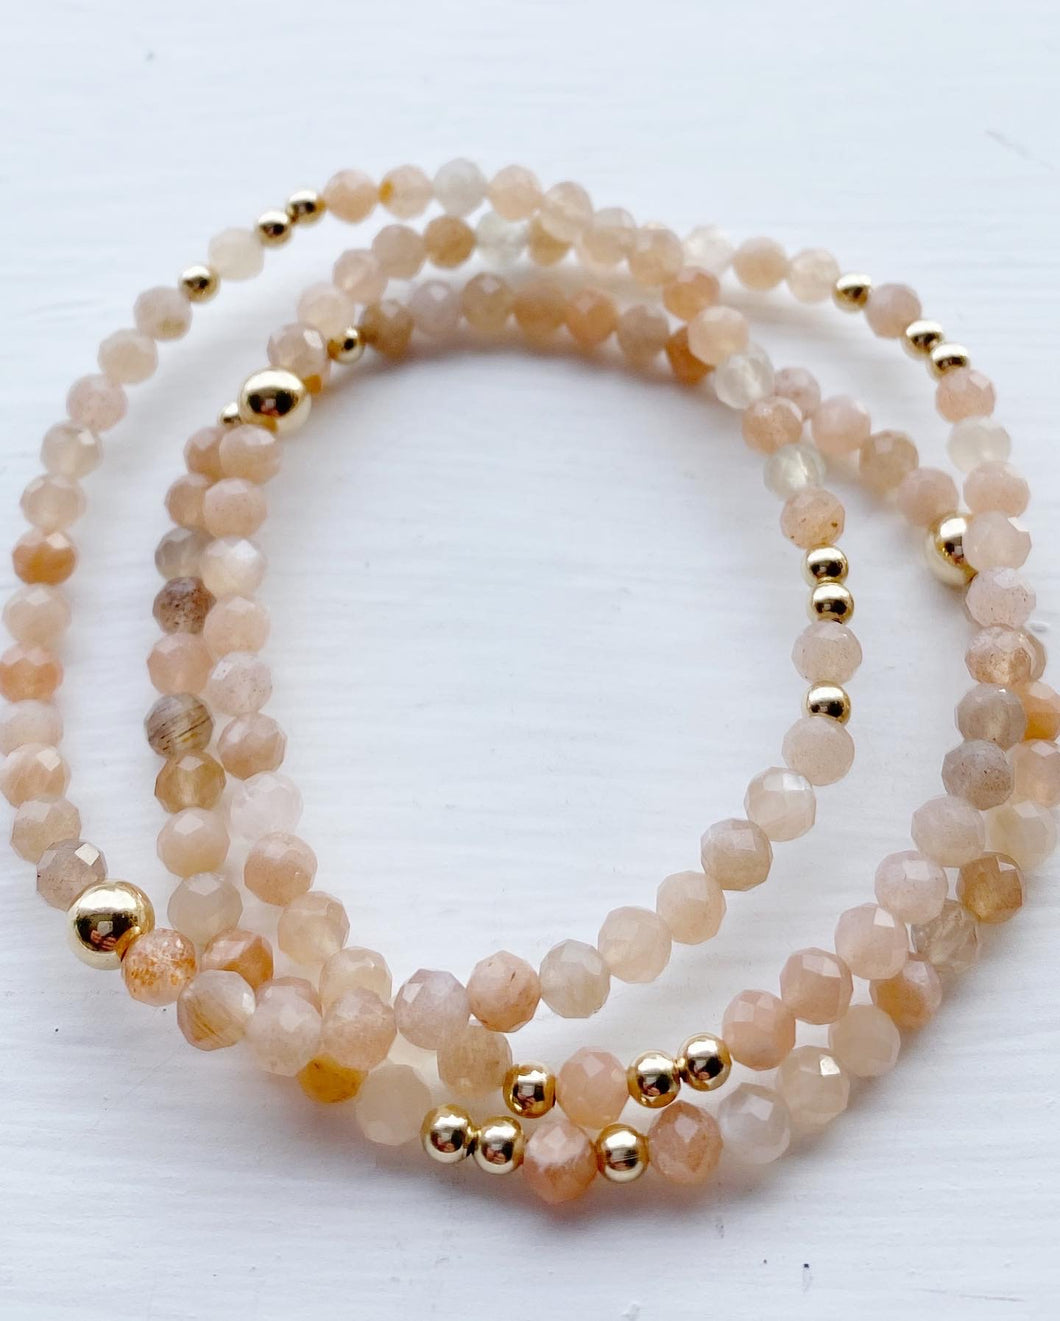 Faceted Peach Moonstone Bracelet with 14K Gold-Filled Beads